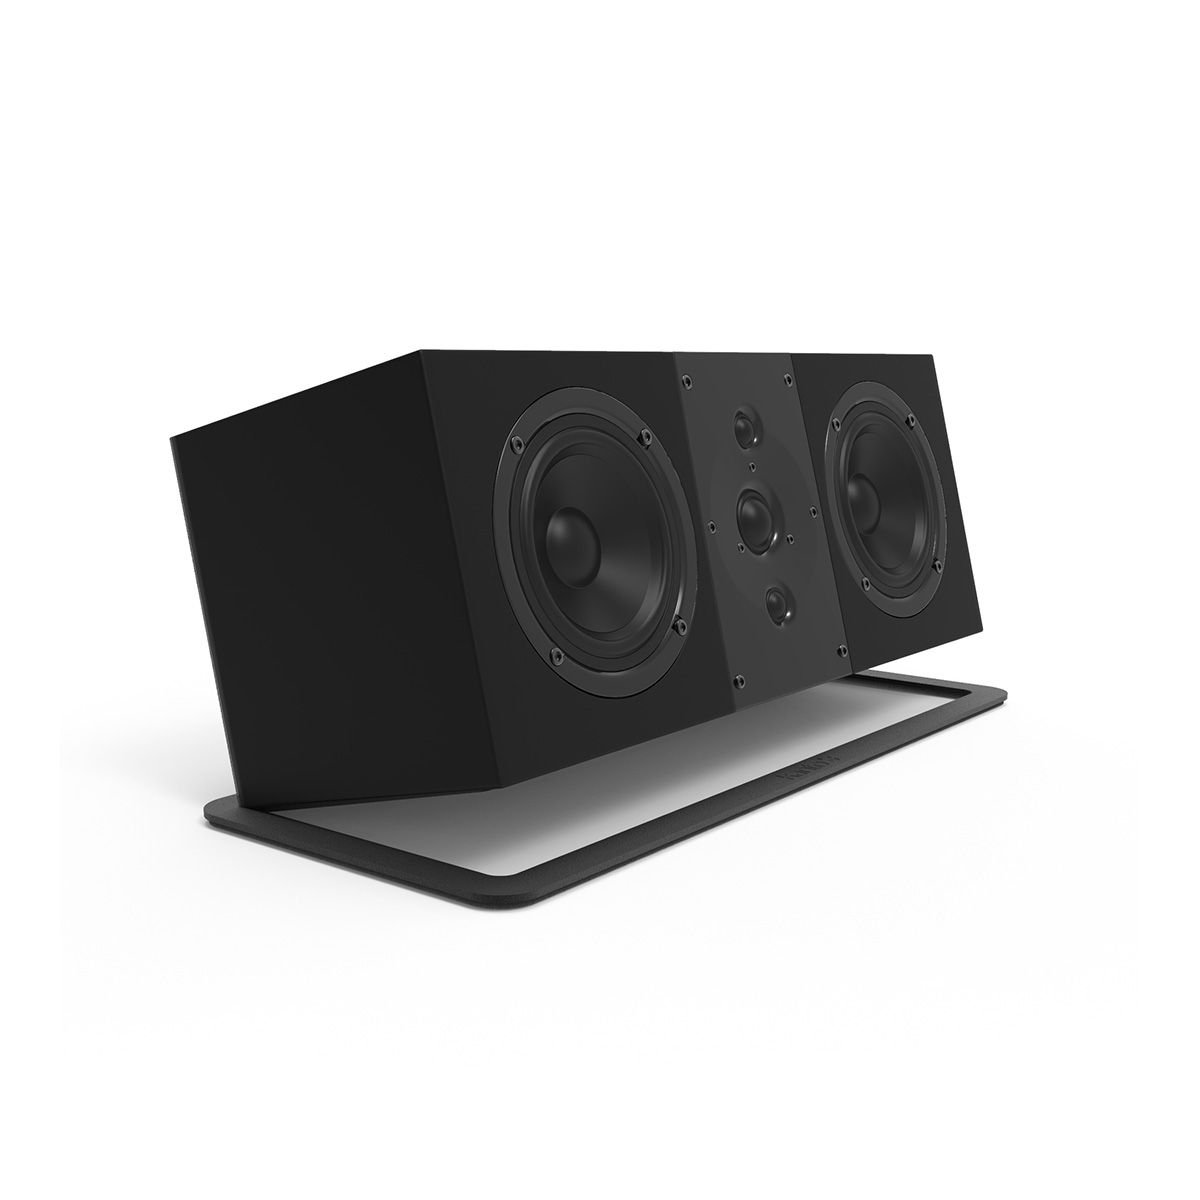 Kanto S10 Center Channel Speaker Stand - Black angled left front view with center channel